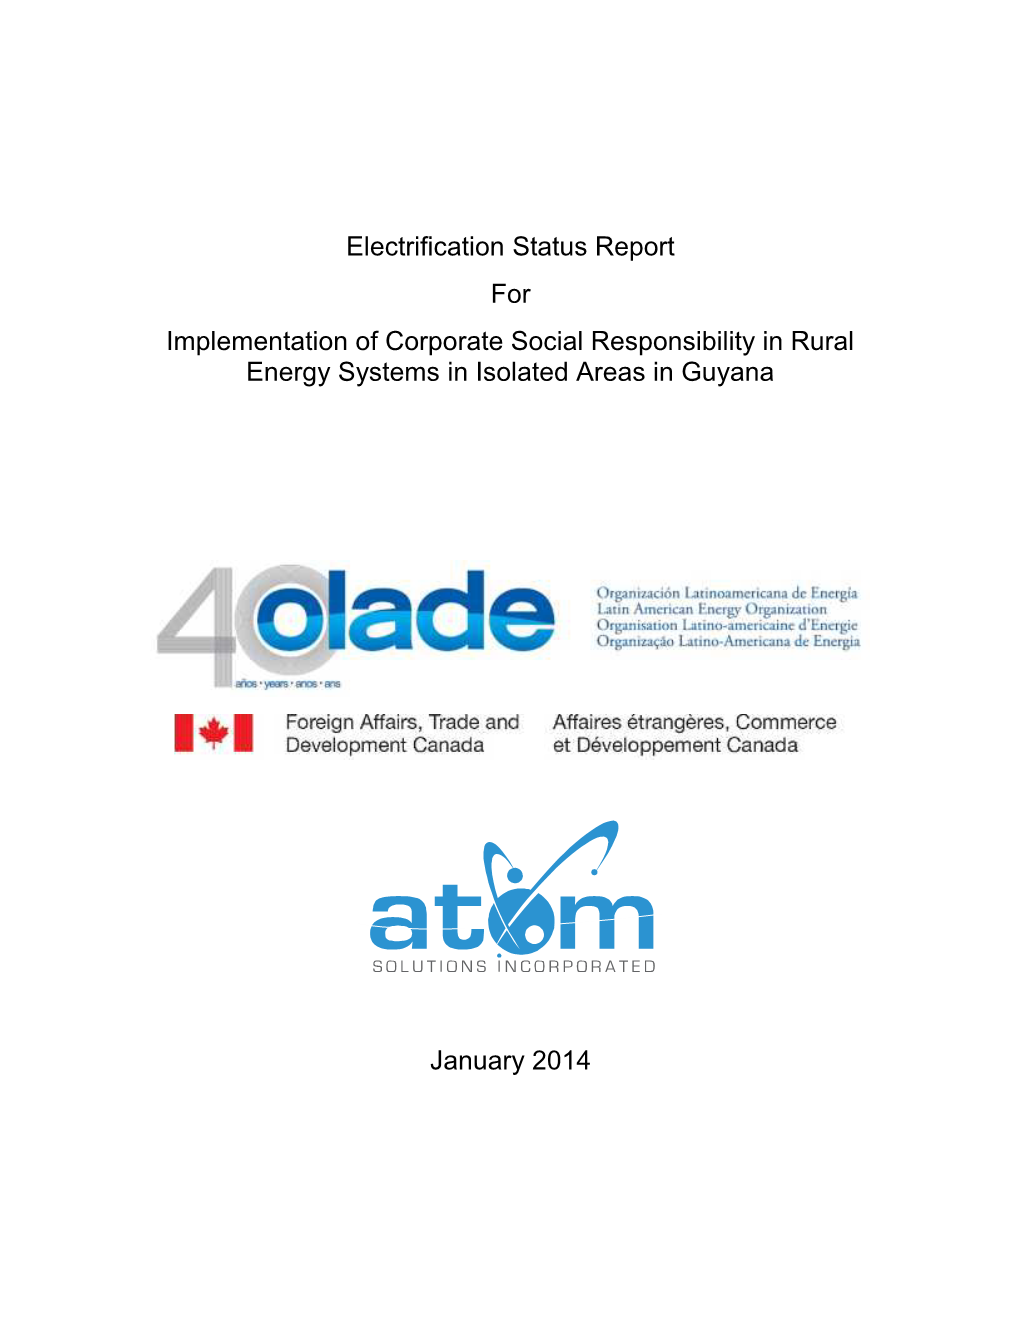 Electrification Status Report for Implementation of Corporate Social Responsibility in Rural Energy Systems in Isolated Areas in Guyana